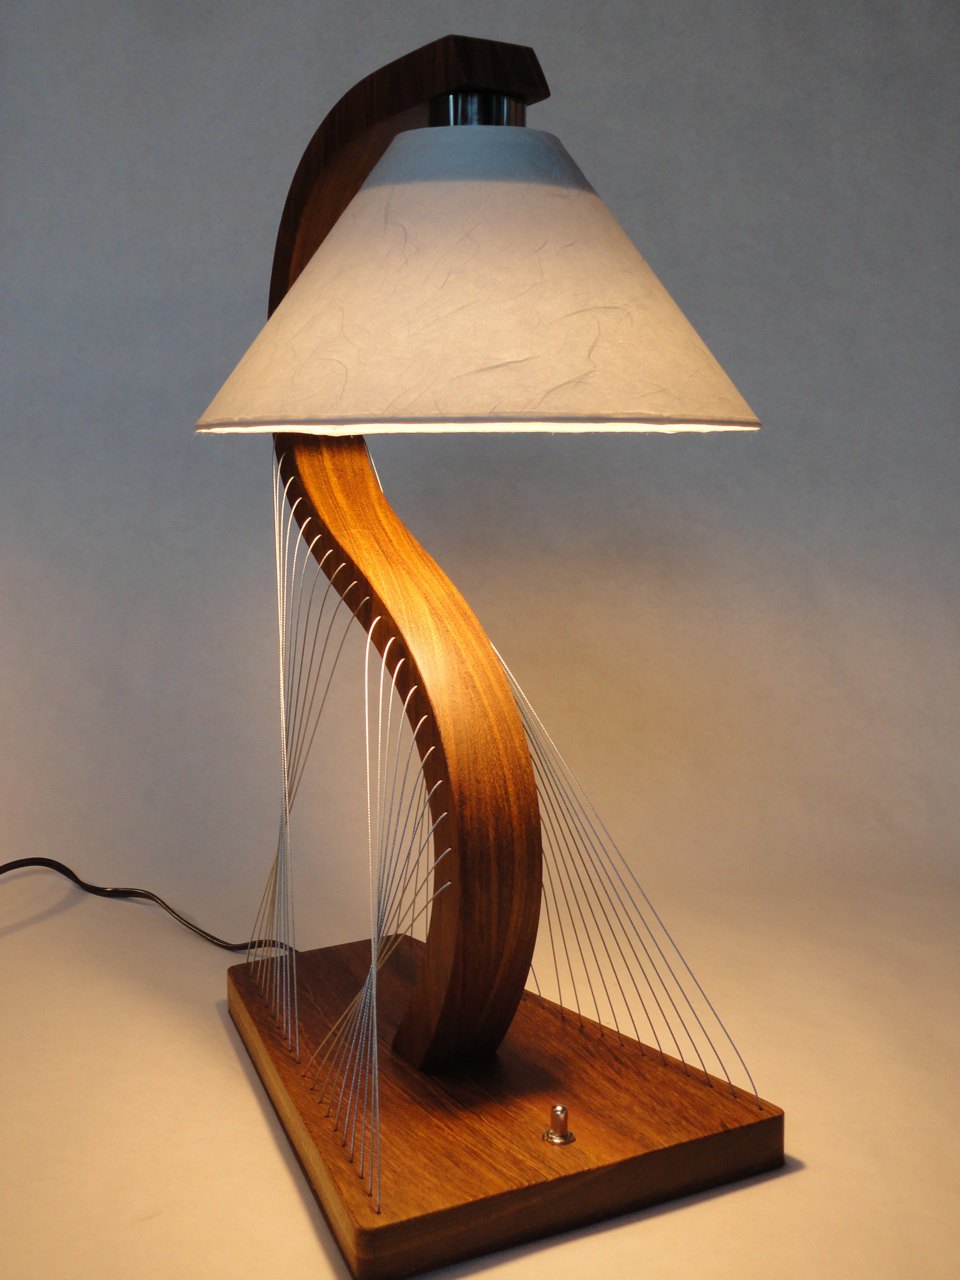 Bedside Lamp by Robby Cuthbert